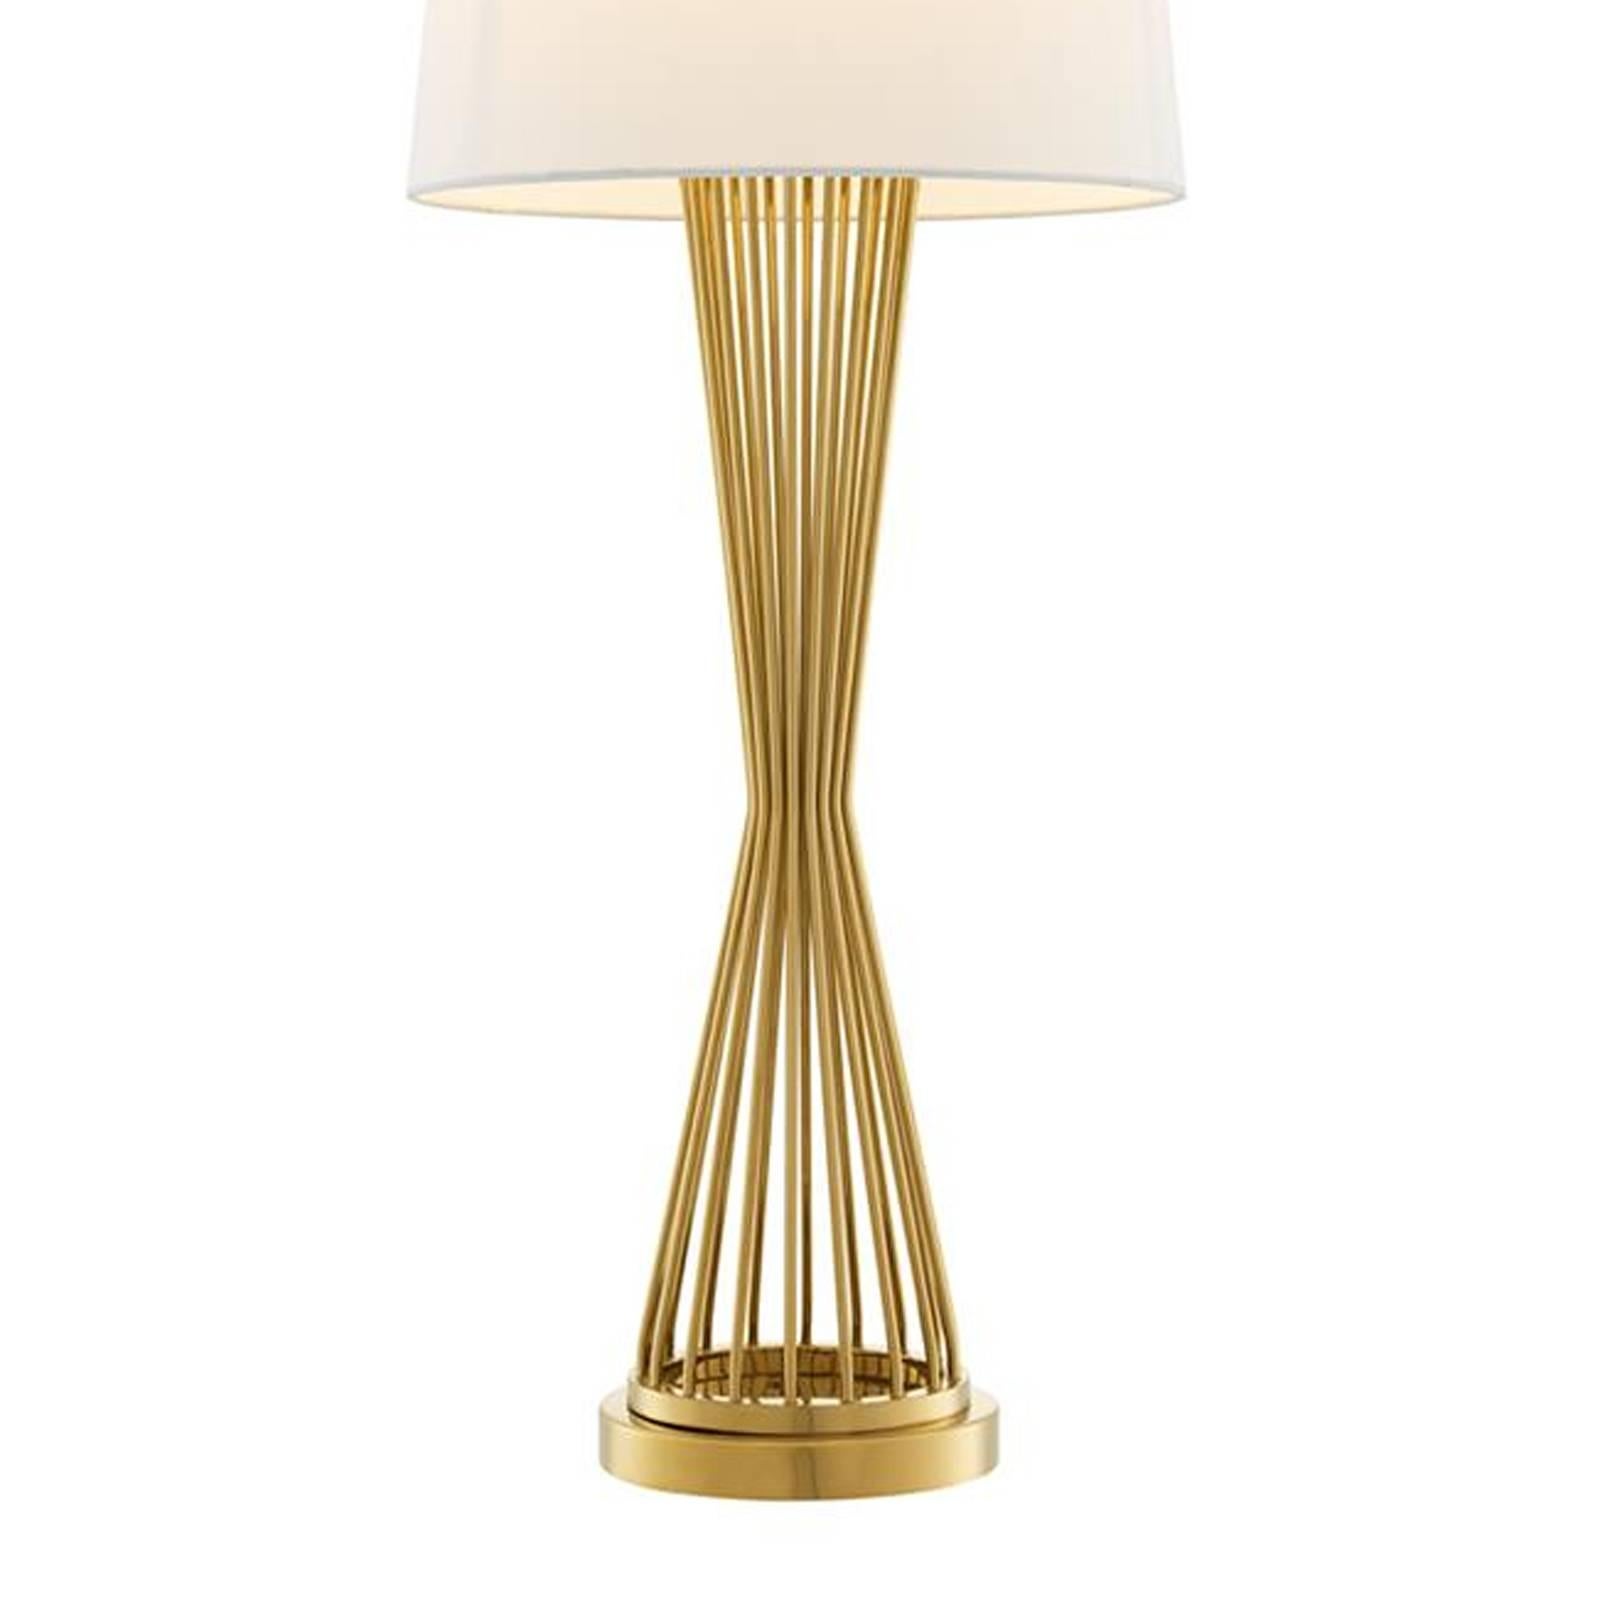 Polished Barnet Table Lamp in Gold or Nickel Finish